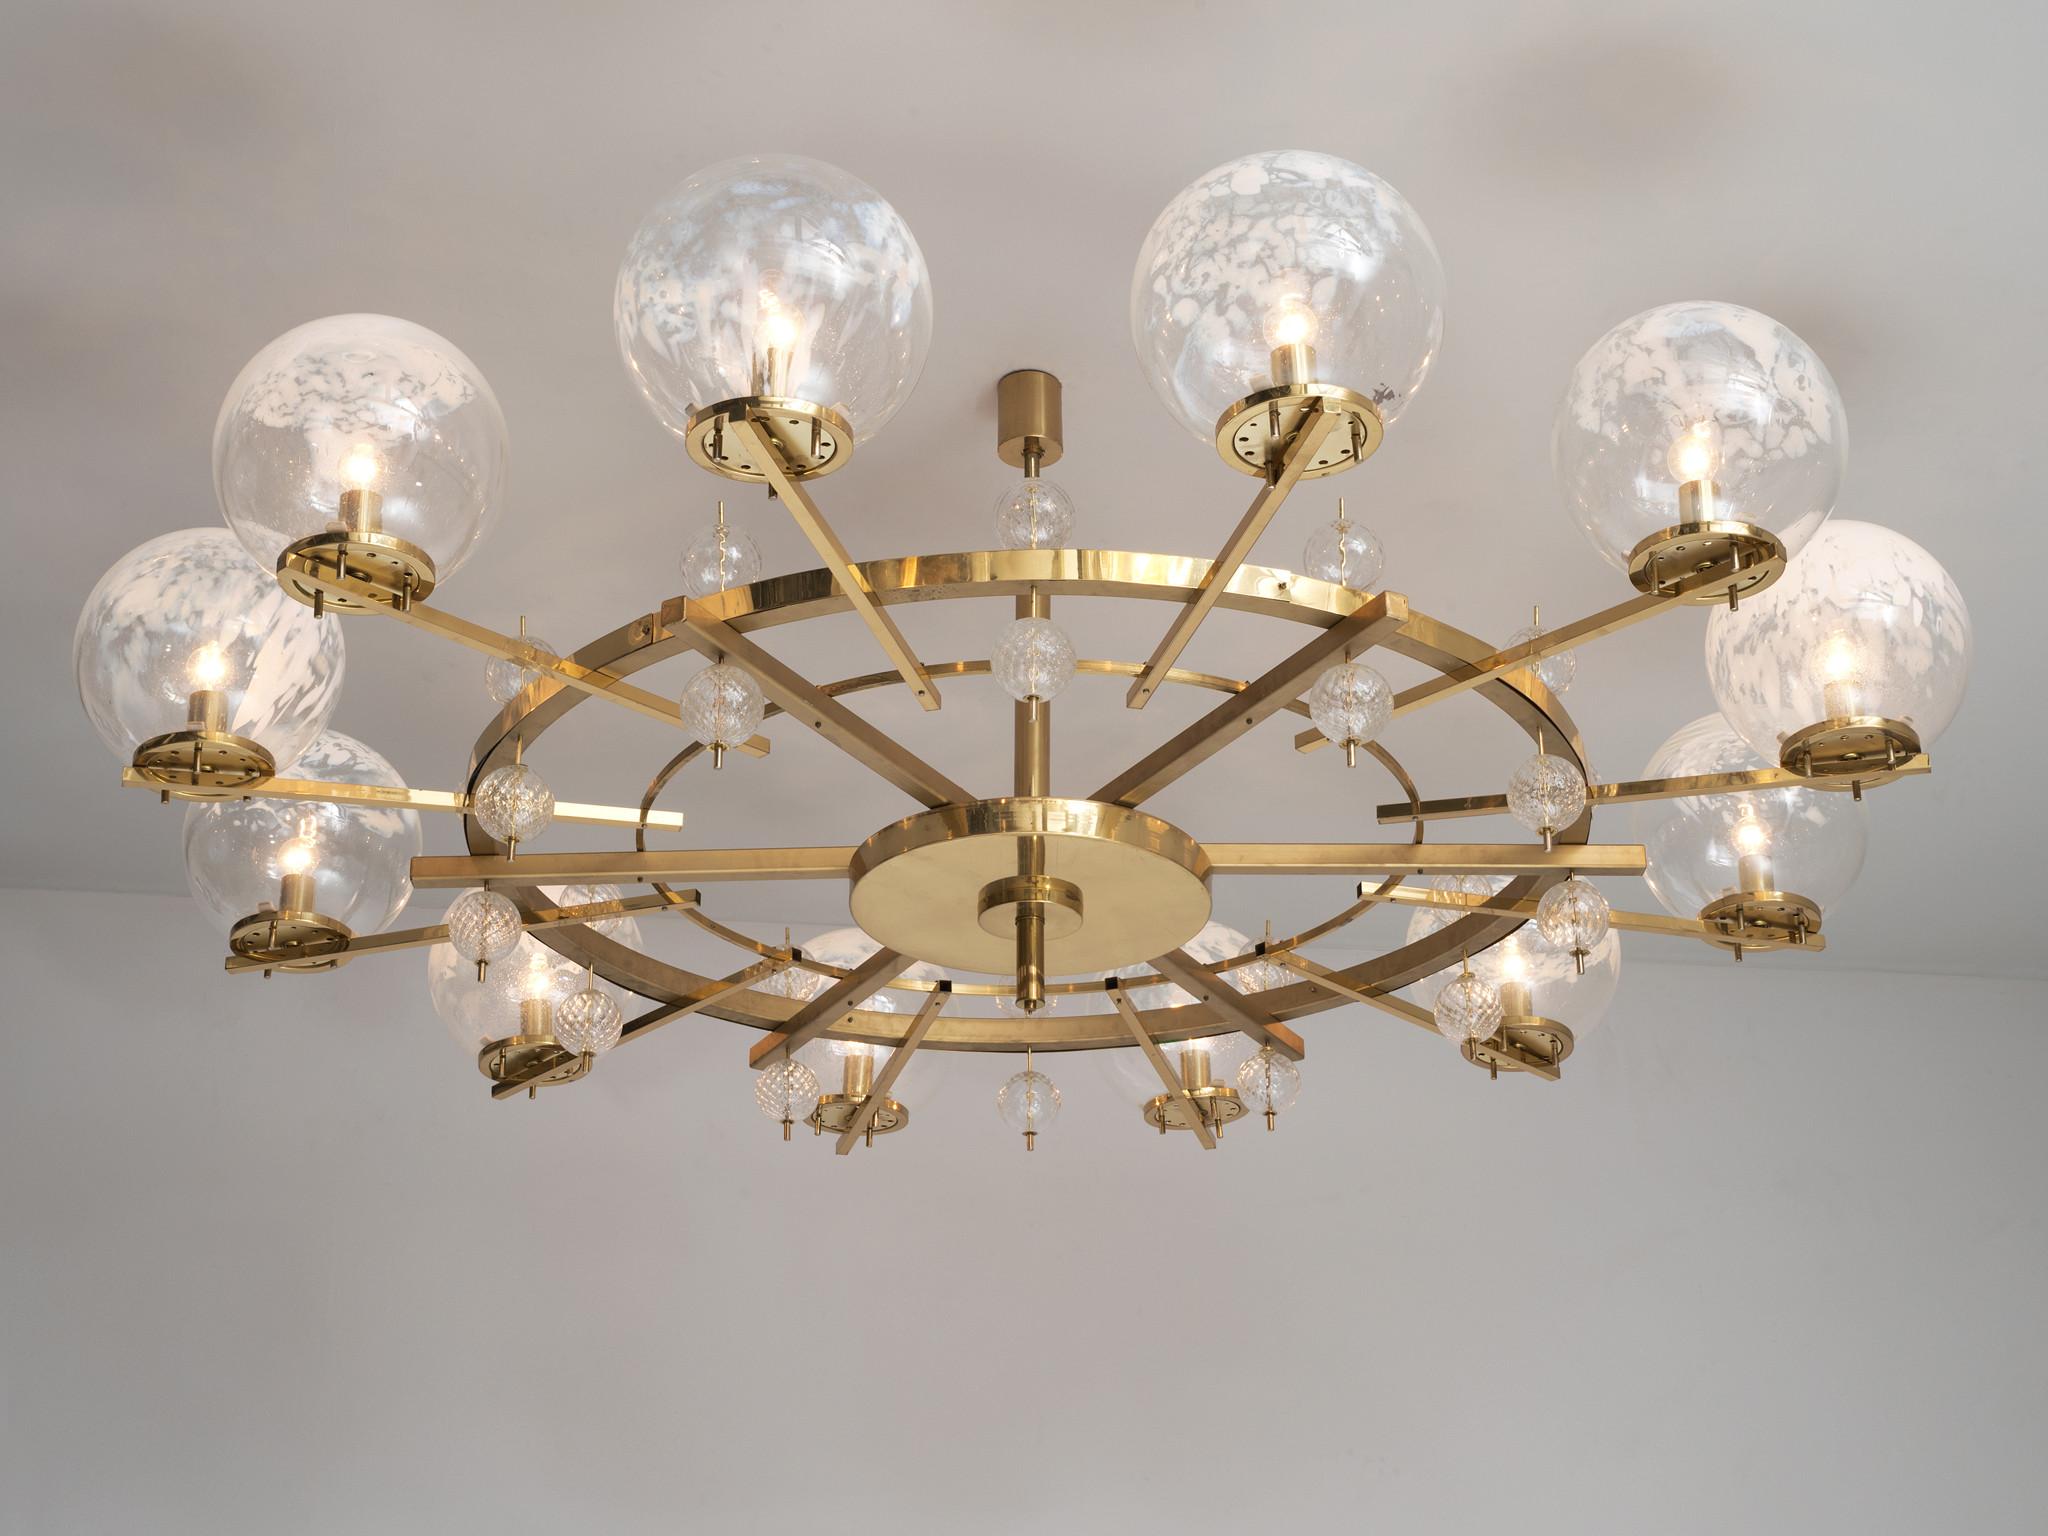 Chandelier, brass, glass, Europe, 1970s.

Extreme large chandelier with brass fixture and art-glass. The chandelier with brass frame consist of twelve-light, formed in a circle, with glass shades. The lamp  illuminates the environment